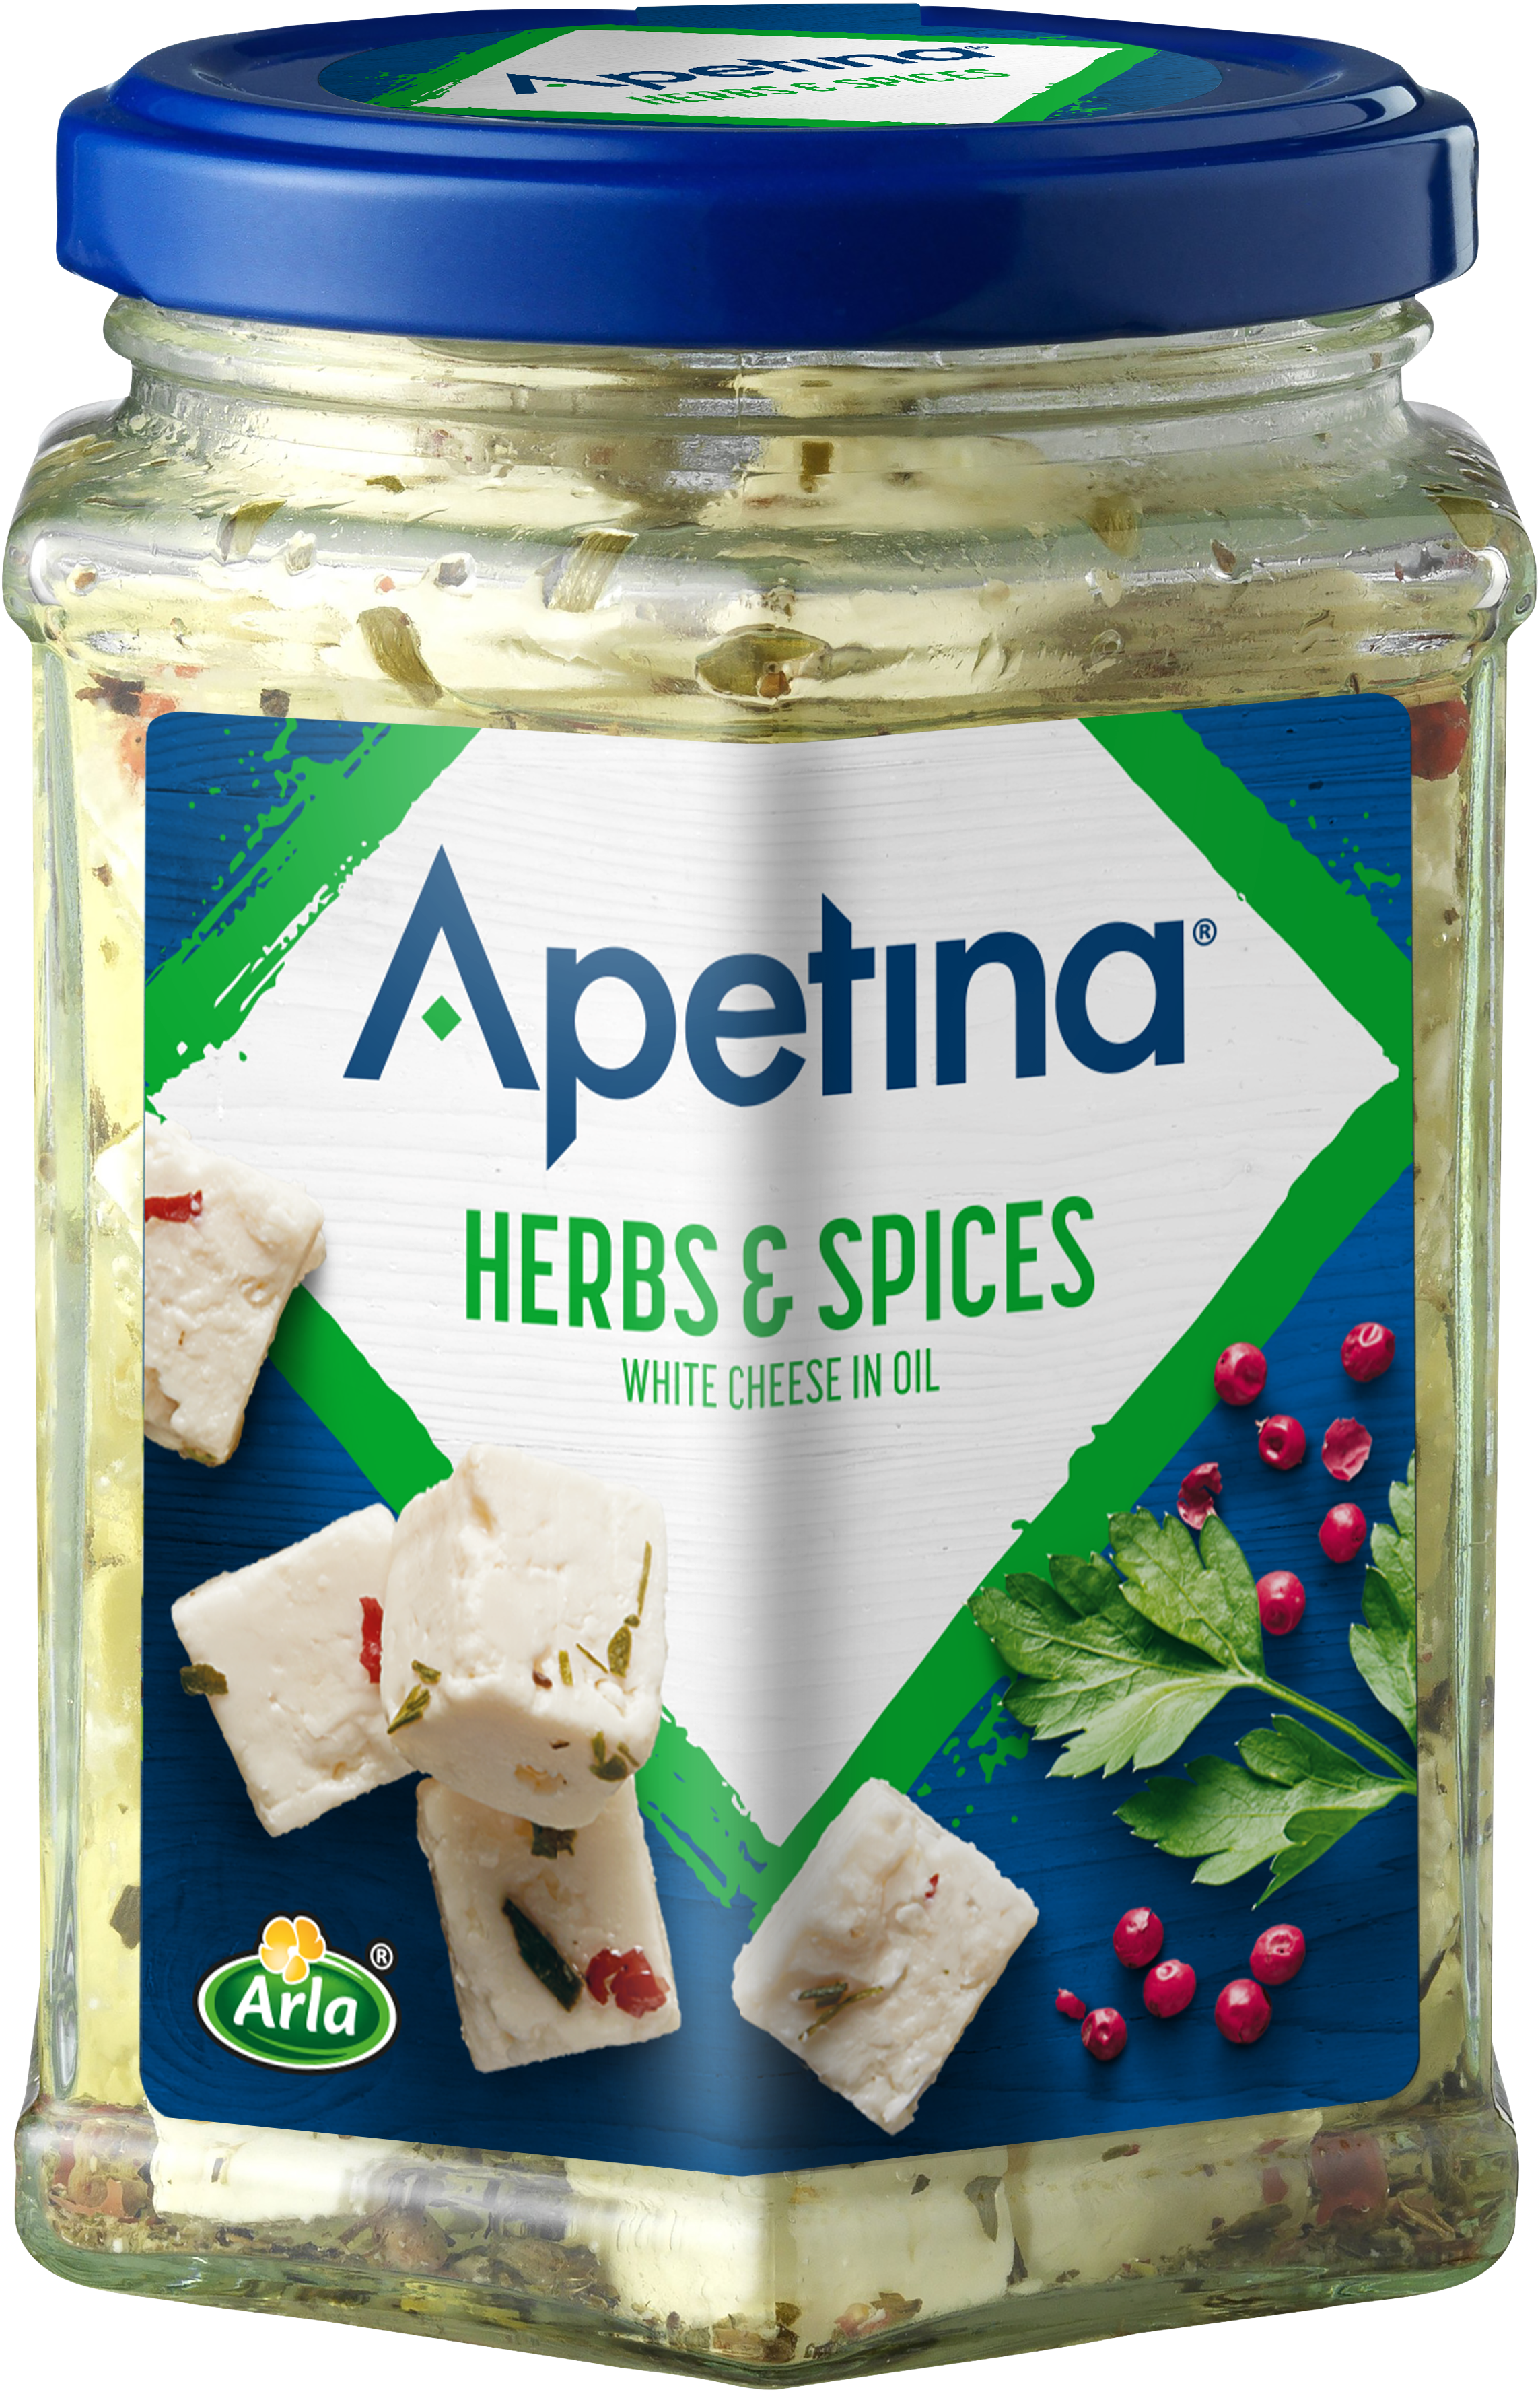 Apetina® White cheese cubes in oil herbs & spices 265g